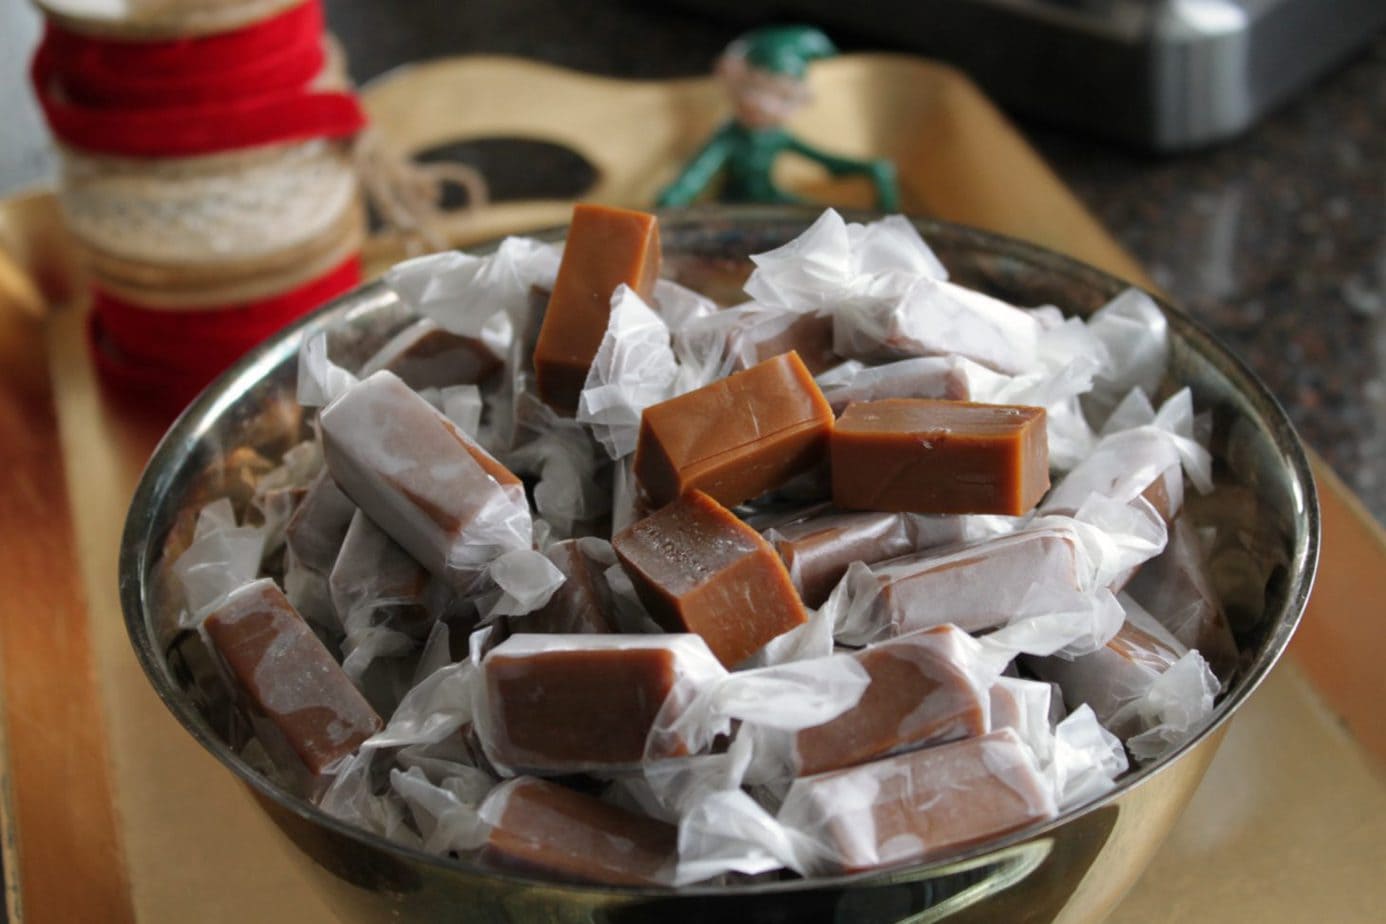 Apple Cider Caramels wrapped in wax paper in a silver bowl.